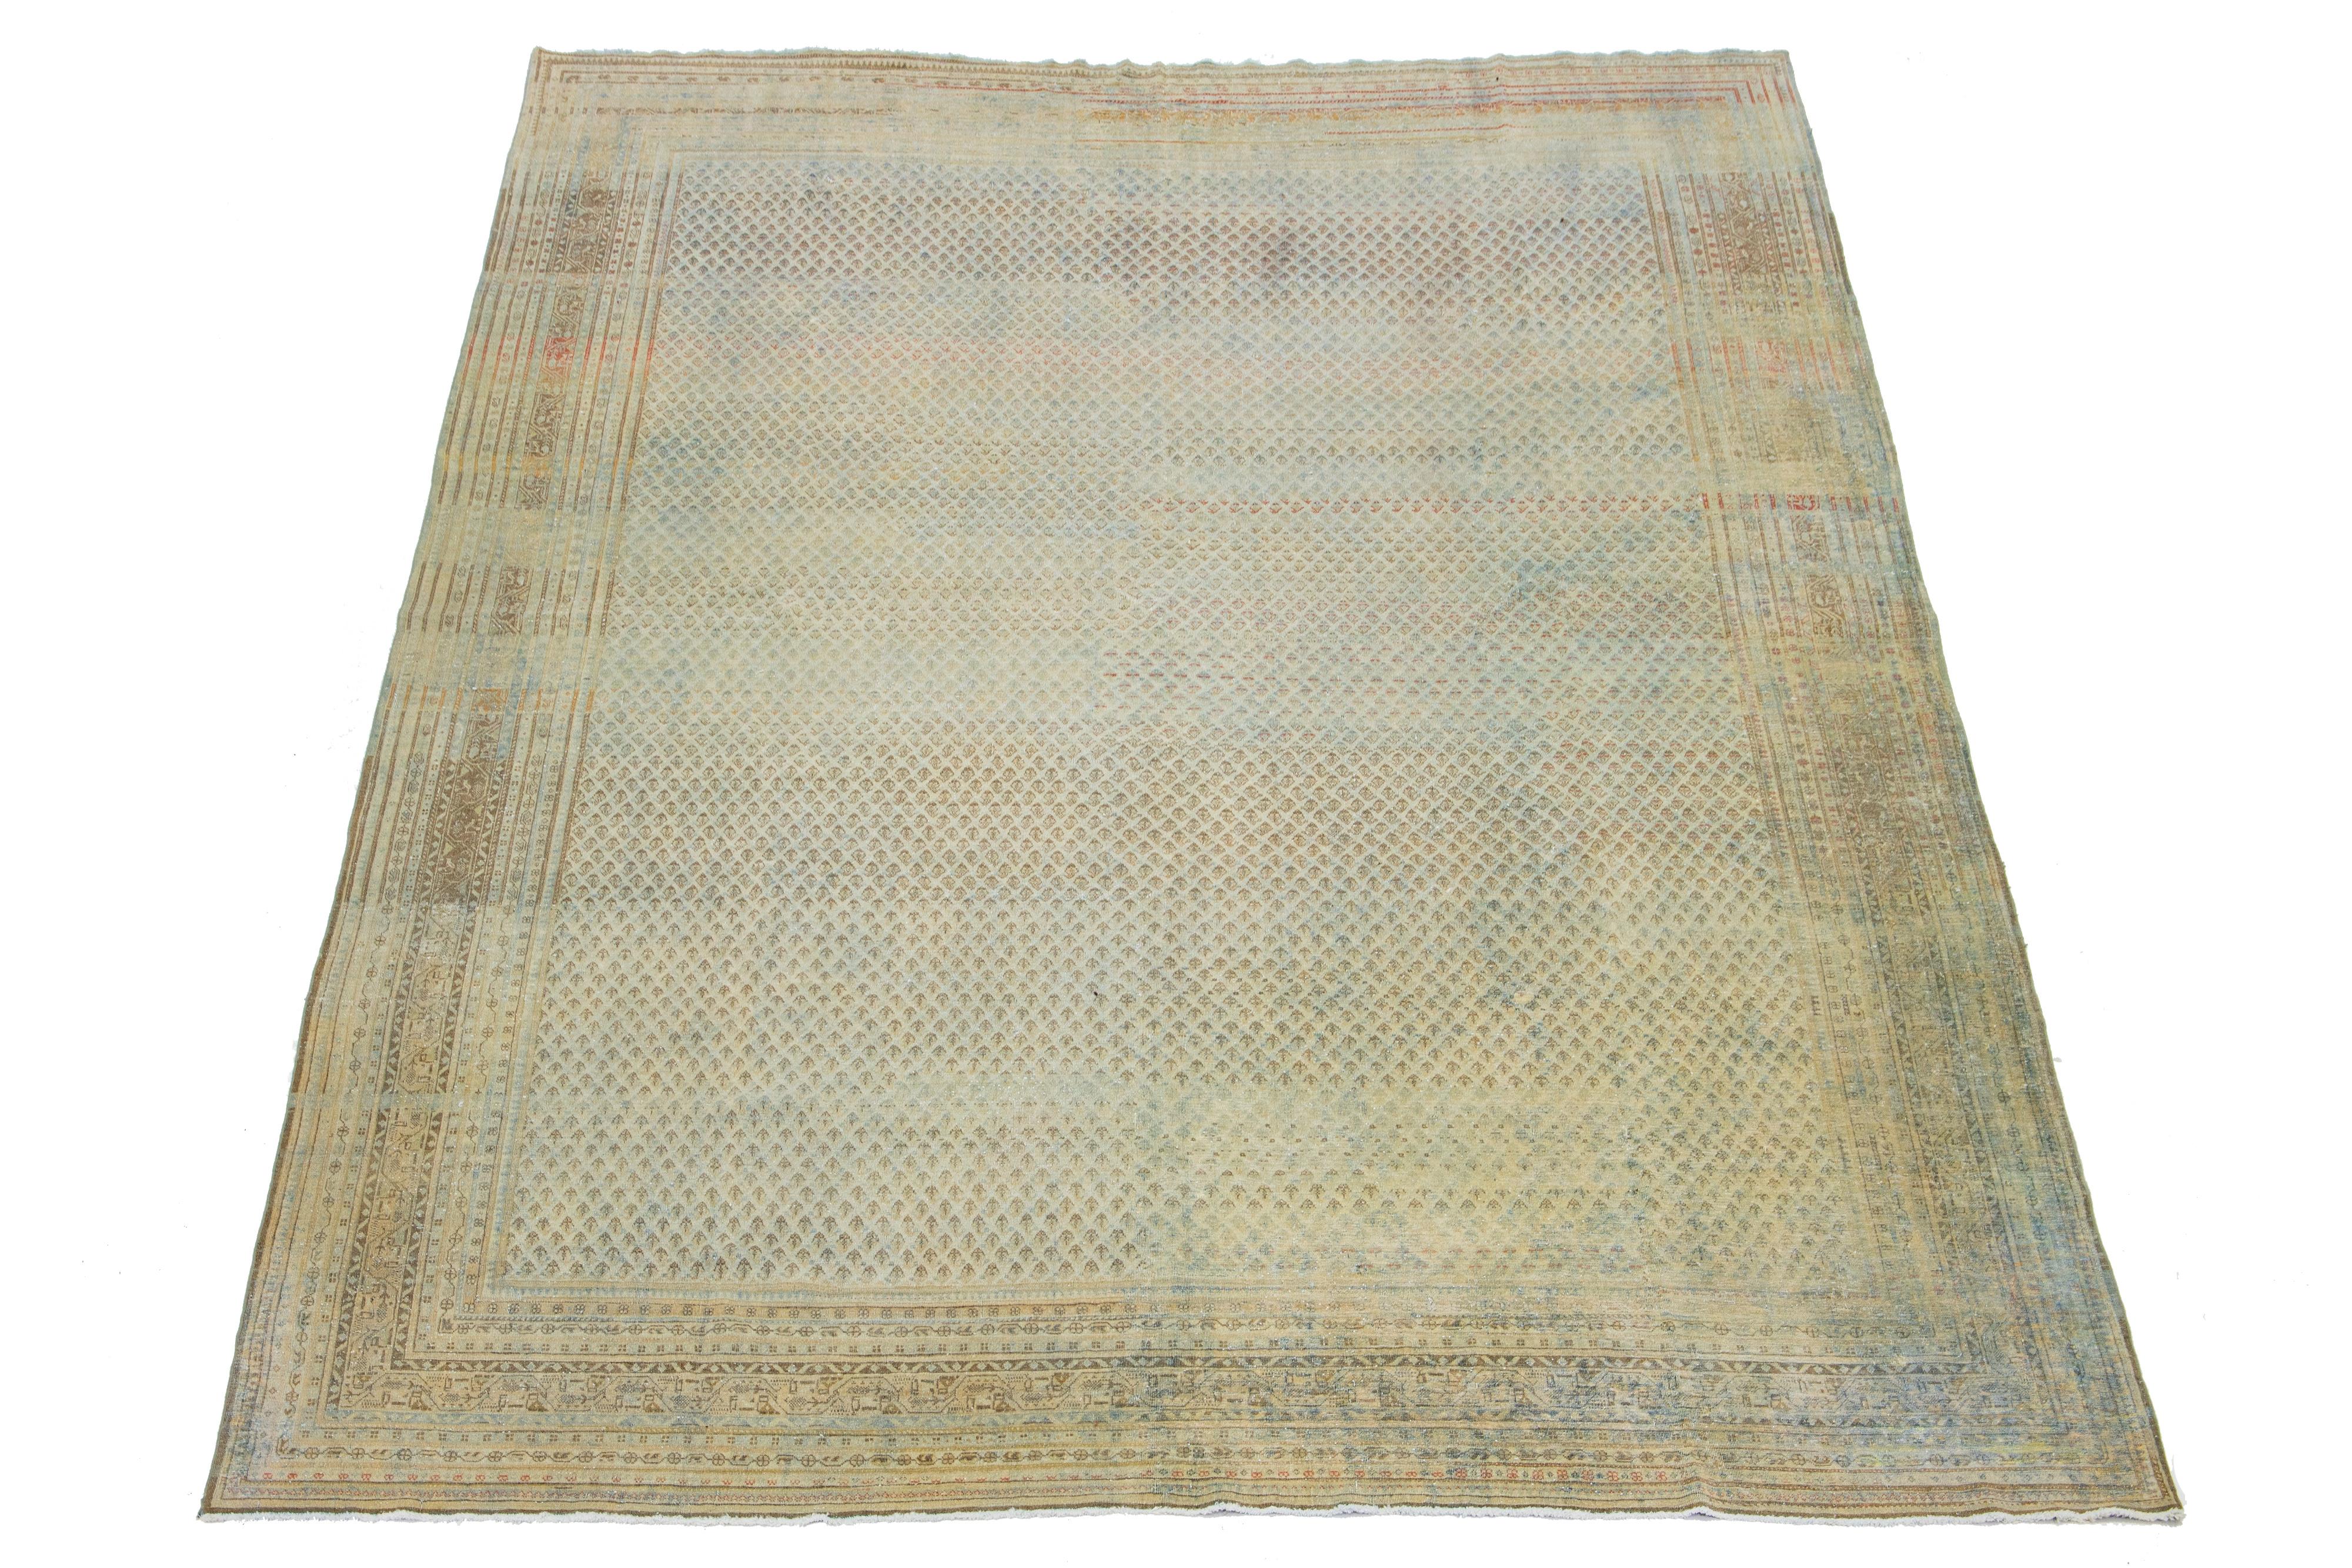 Beautiful room-size antique Malayer hand-knotted wool rug with a beige color field. This Persian rug has a gorgeous all-over design with blue and brown accents.

This rug measures 10'2